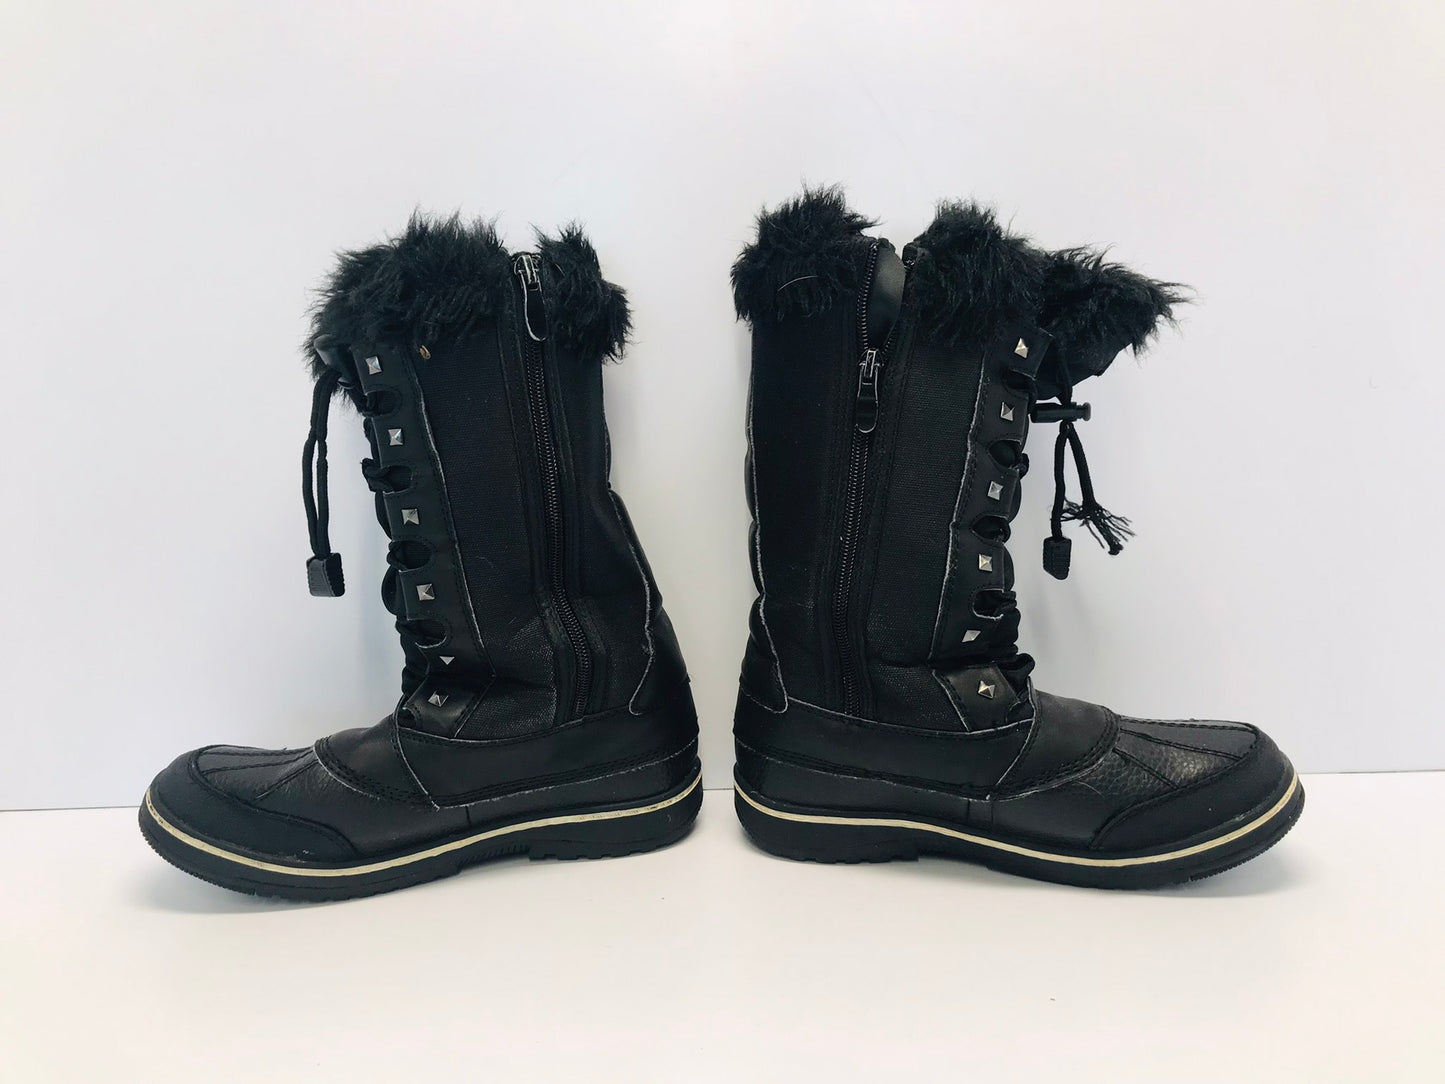 Winter Boots Ladies Size 7 Superfeet Black With Faux Fur Like New